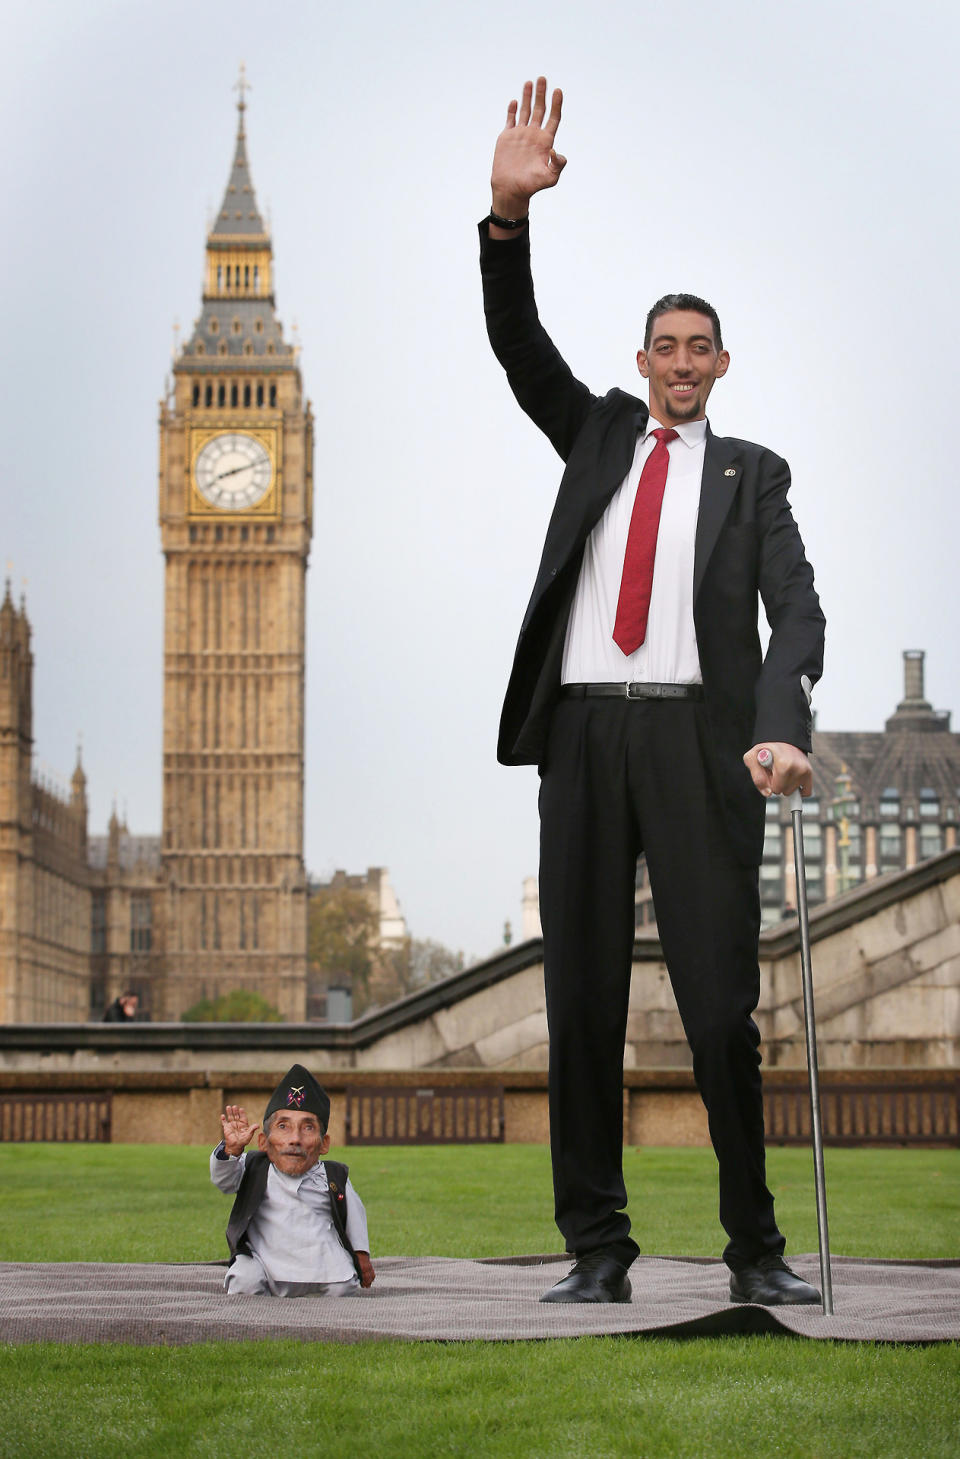 Photos of the day - November 13, 2014 The shortest man ever, Chandra Bahadur Dangi meets the world’s tallest man, Sultan Kosen for the very first time on November 13, 2014 in London, England –– A Palestinian girl looks on as members of Hamas’s armed wing take part in an anti-Israel rally in Rafah in the southern Gaza Strip –– Prince Harry, Honorary Air Commandant, visits RAF Honington on November 13, 2014 in Bury St Edmunds, England –– U.S. President Barack Obama listens with an earphone in his ear for translation as Myanmar President Thein Sein speaks during the group photo for the 2nd ASEAN-United States Summit in Naypyitaw, Myanmar –– Indian farmers return home carrying bundles of paddy on the outskirts of Gauhati, India… are just a few of the photos of the day for November 13, 2014. (Photos by Peter Macdiarmid/Getty Images, REUTERS/Ibraheem Abu Mustafa, Chris Jackson/Getty Images, EPA/Barbara Walton, AP Photo/Anupam Nath) 
 See more 
 photos of the day 
 and our  
 other slideshows 
 on Yahoo News!